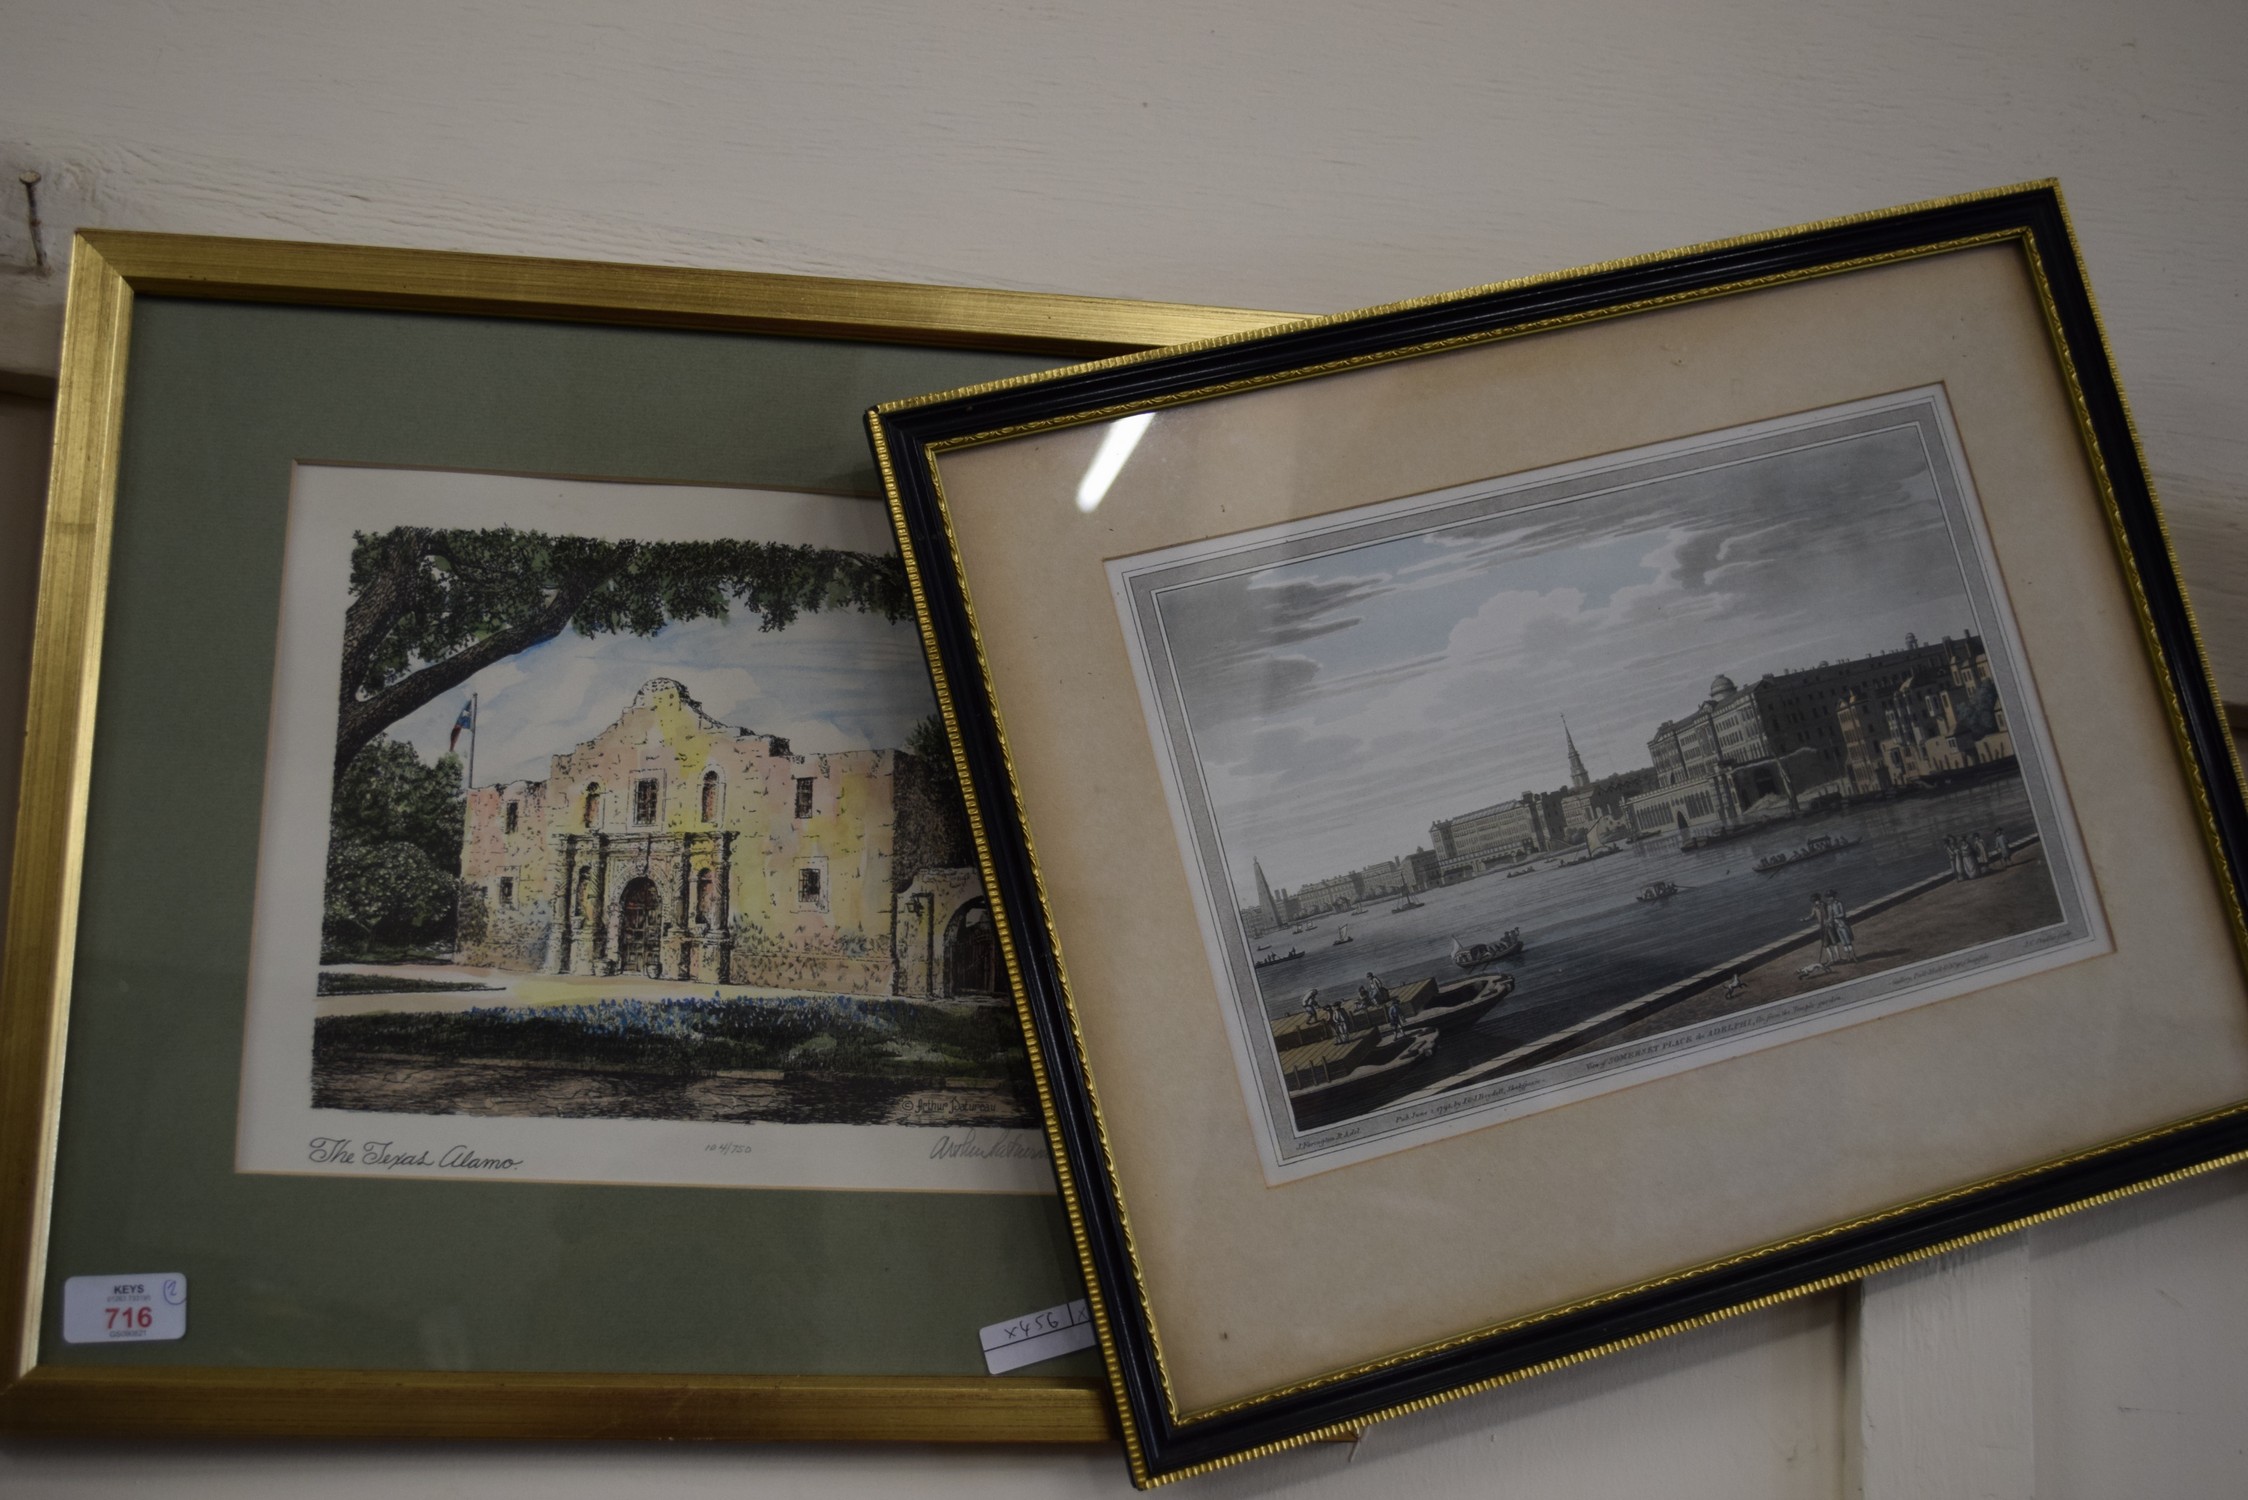 TWO COLOURED PRINTS, "THE TEXAS ALAMO" AND "THE VIEW OF SOMERSET PLACE, THE ADELPHI", BOTH FRAMED